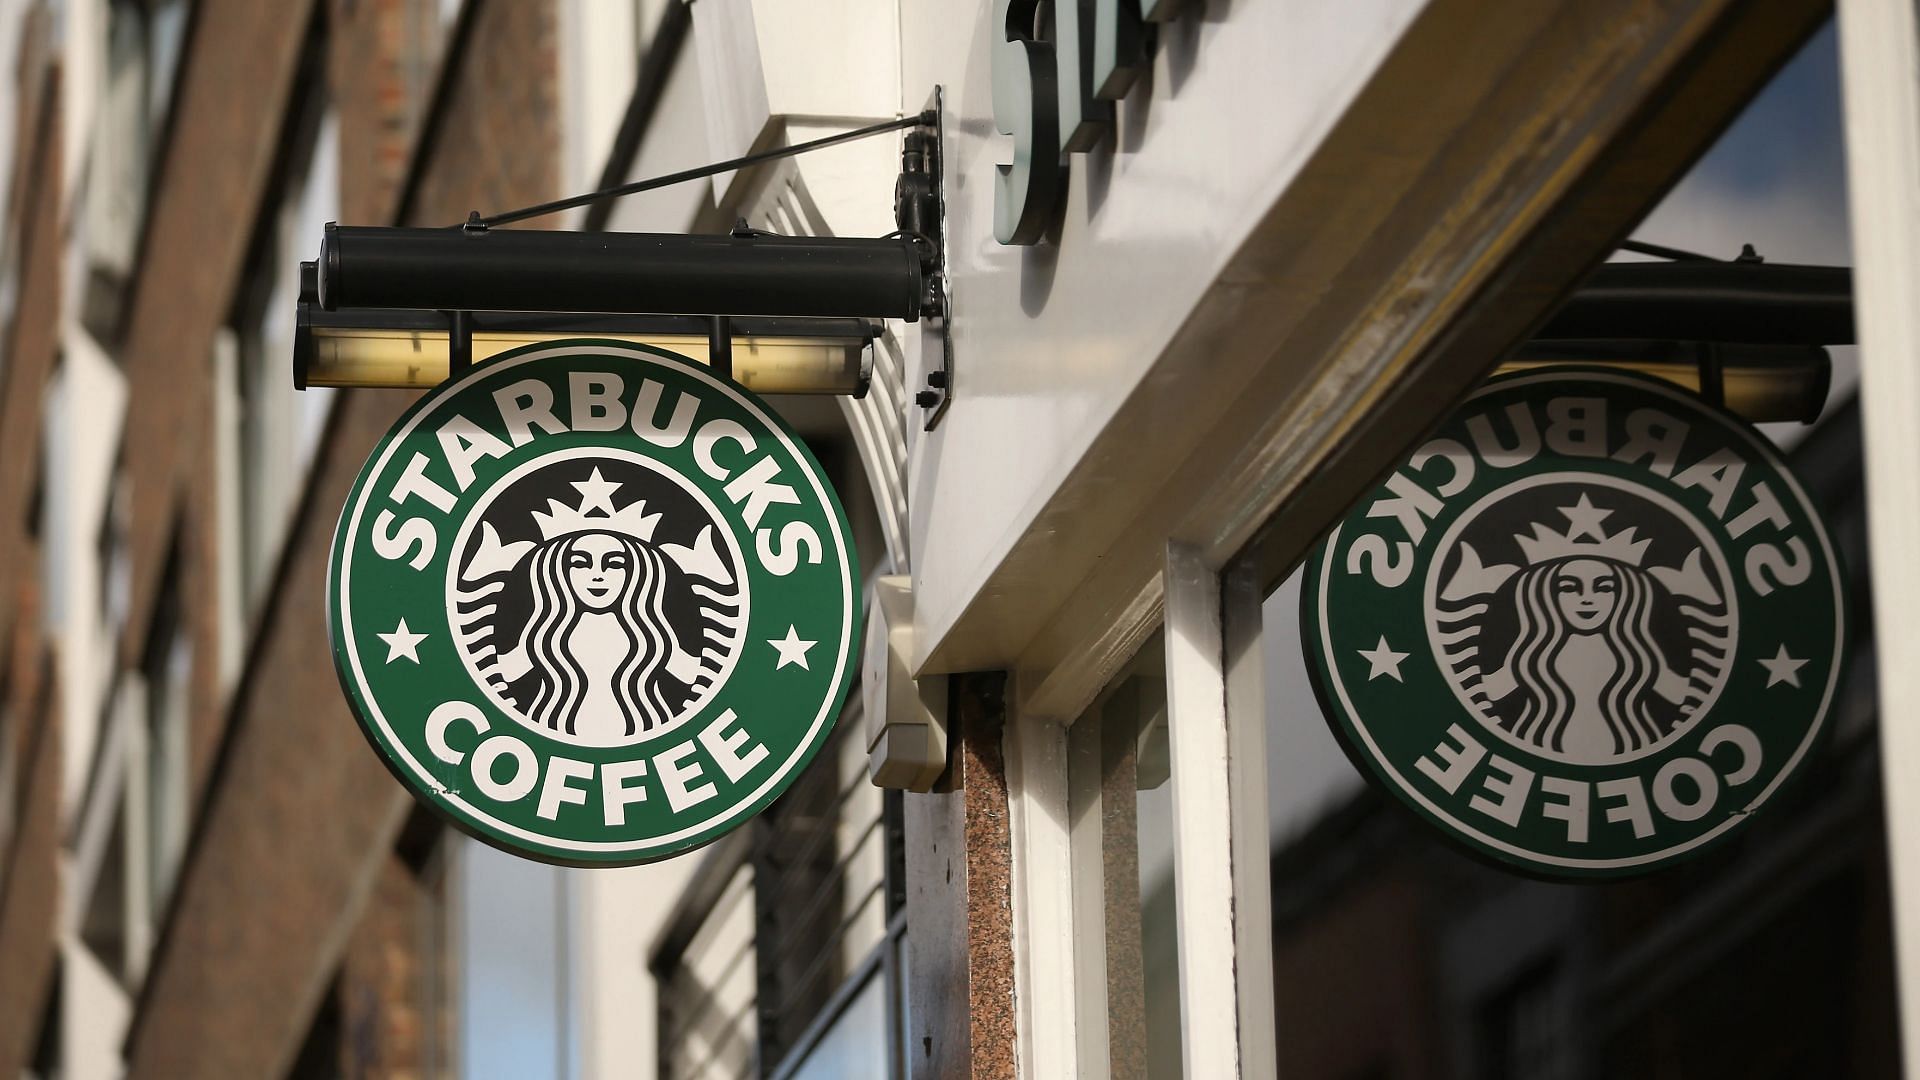 Starbucks has introduced a new Oleato range of olive-oil infused coffee in Italy (Image via Oli Scarff/Getty Images)